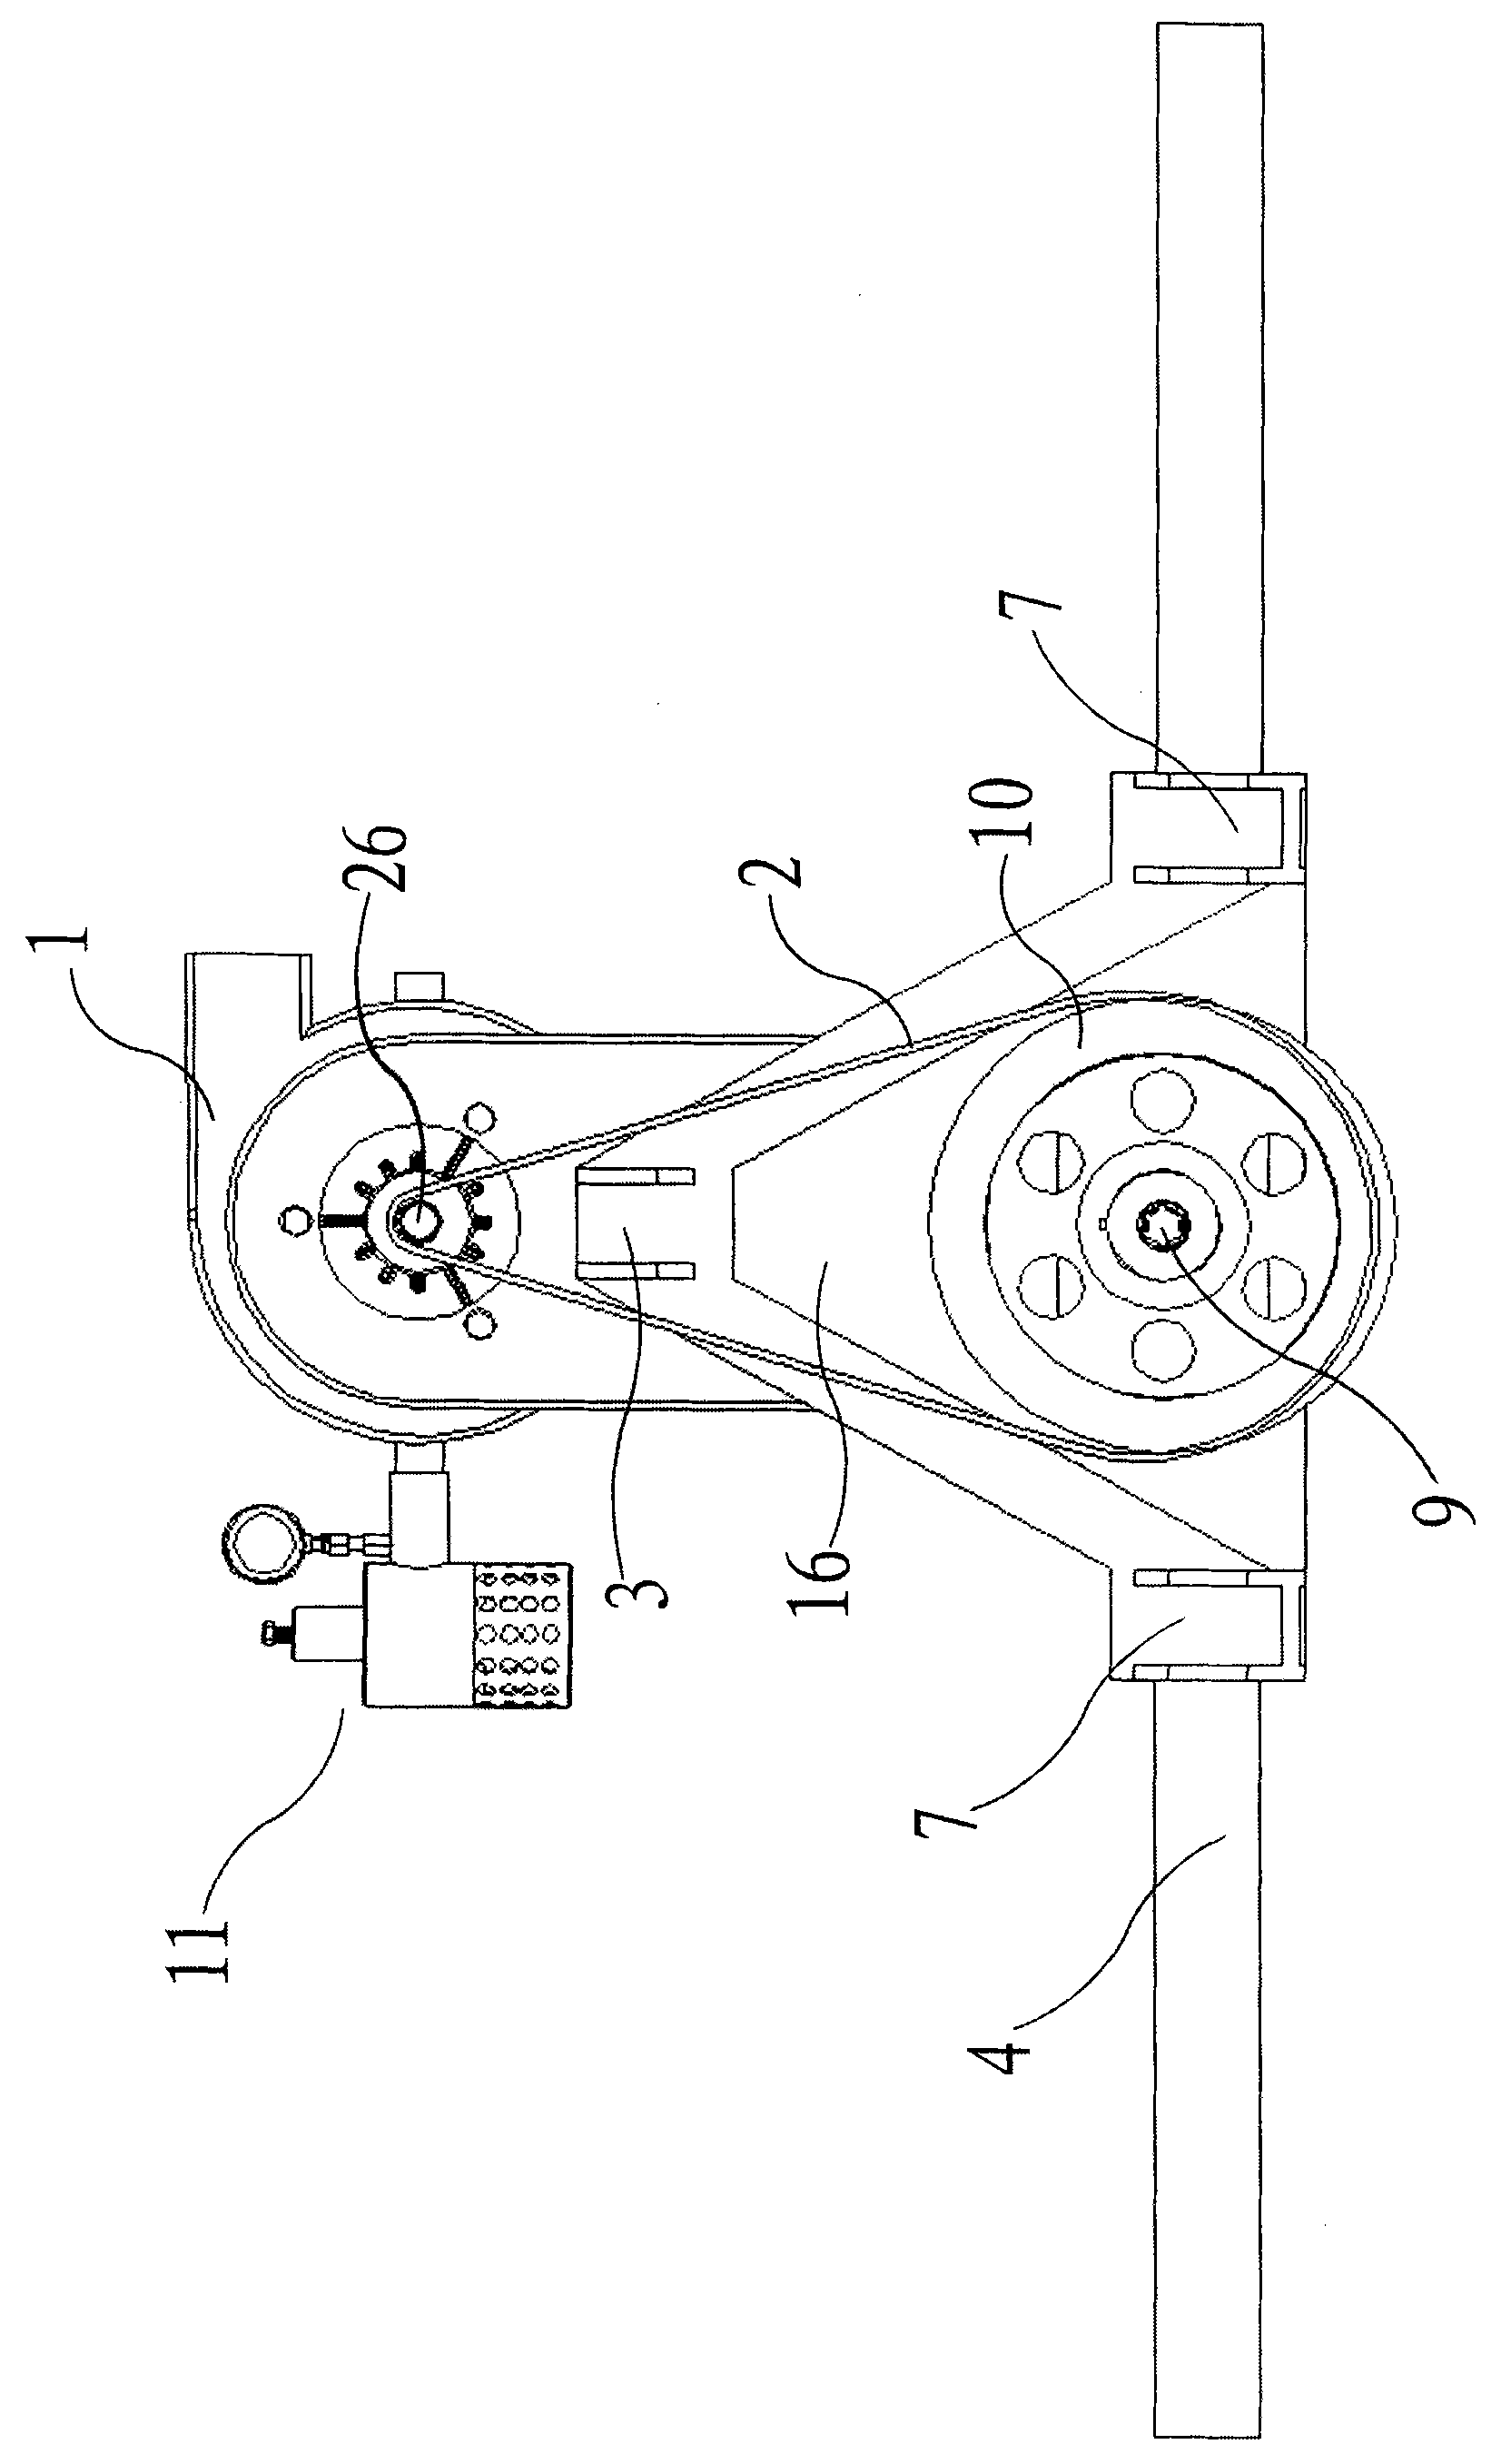 Fan assembly of air-aspiration type planting machine